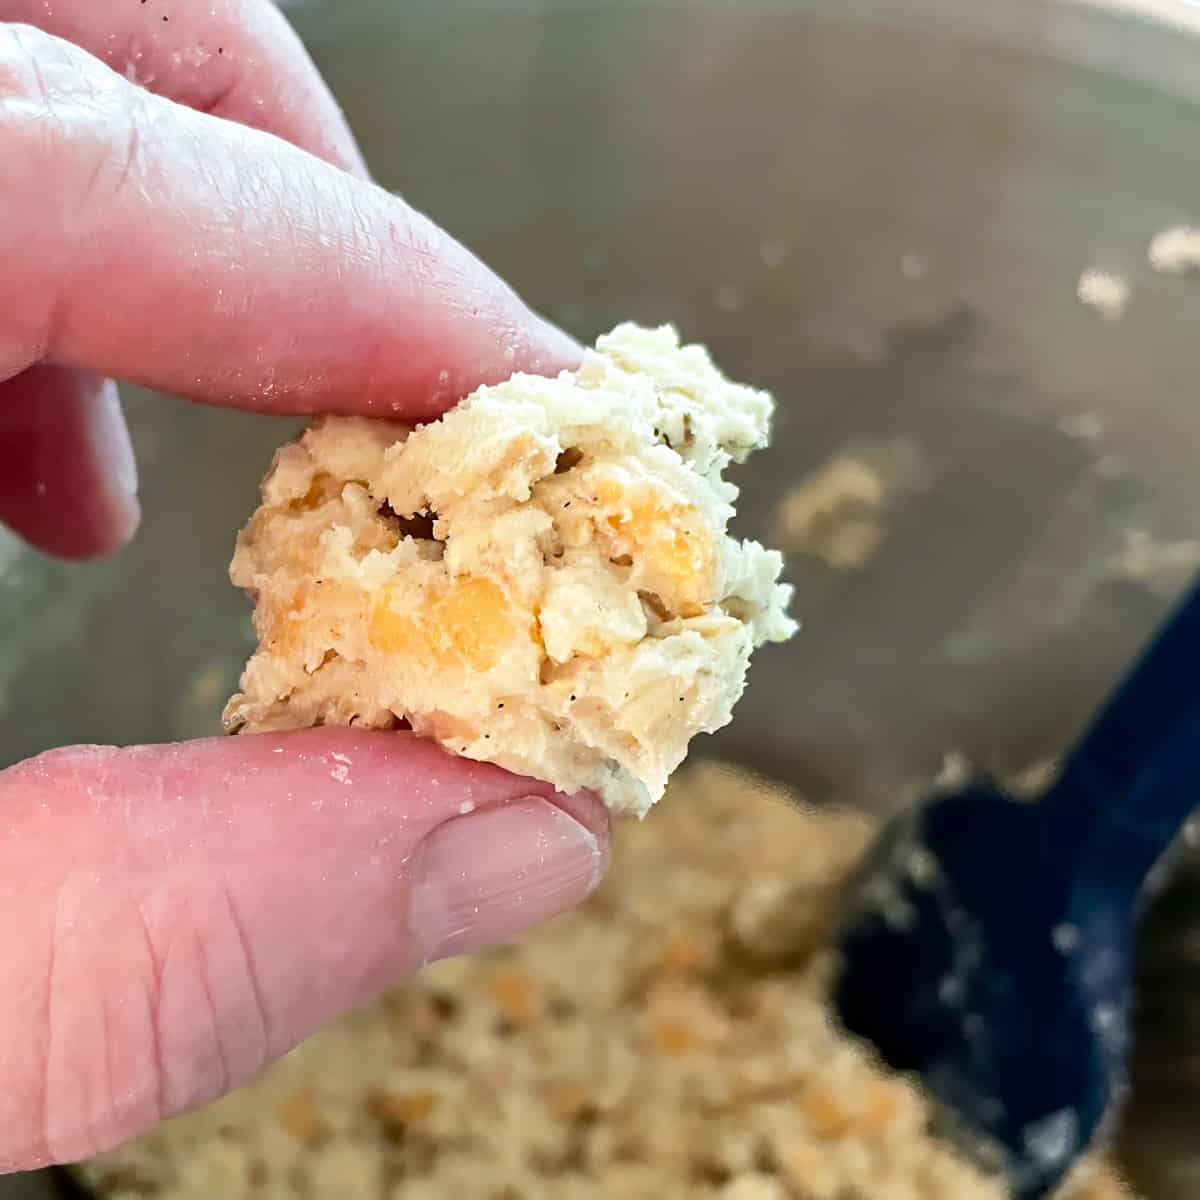 A small piece of cookie dough to show the moisture and the chips.